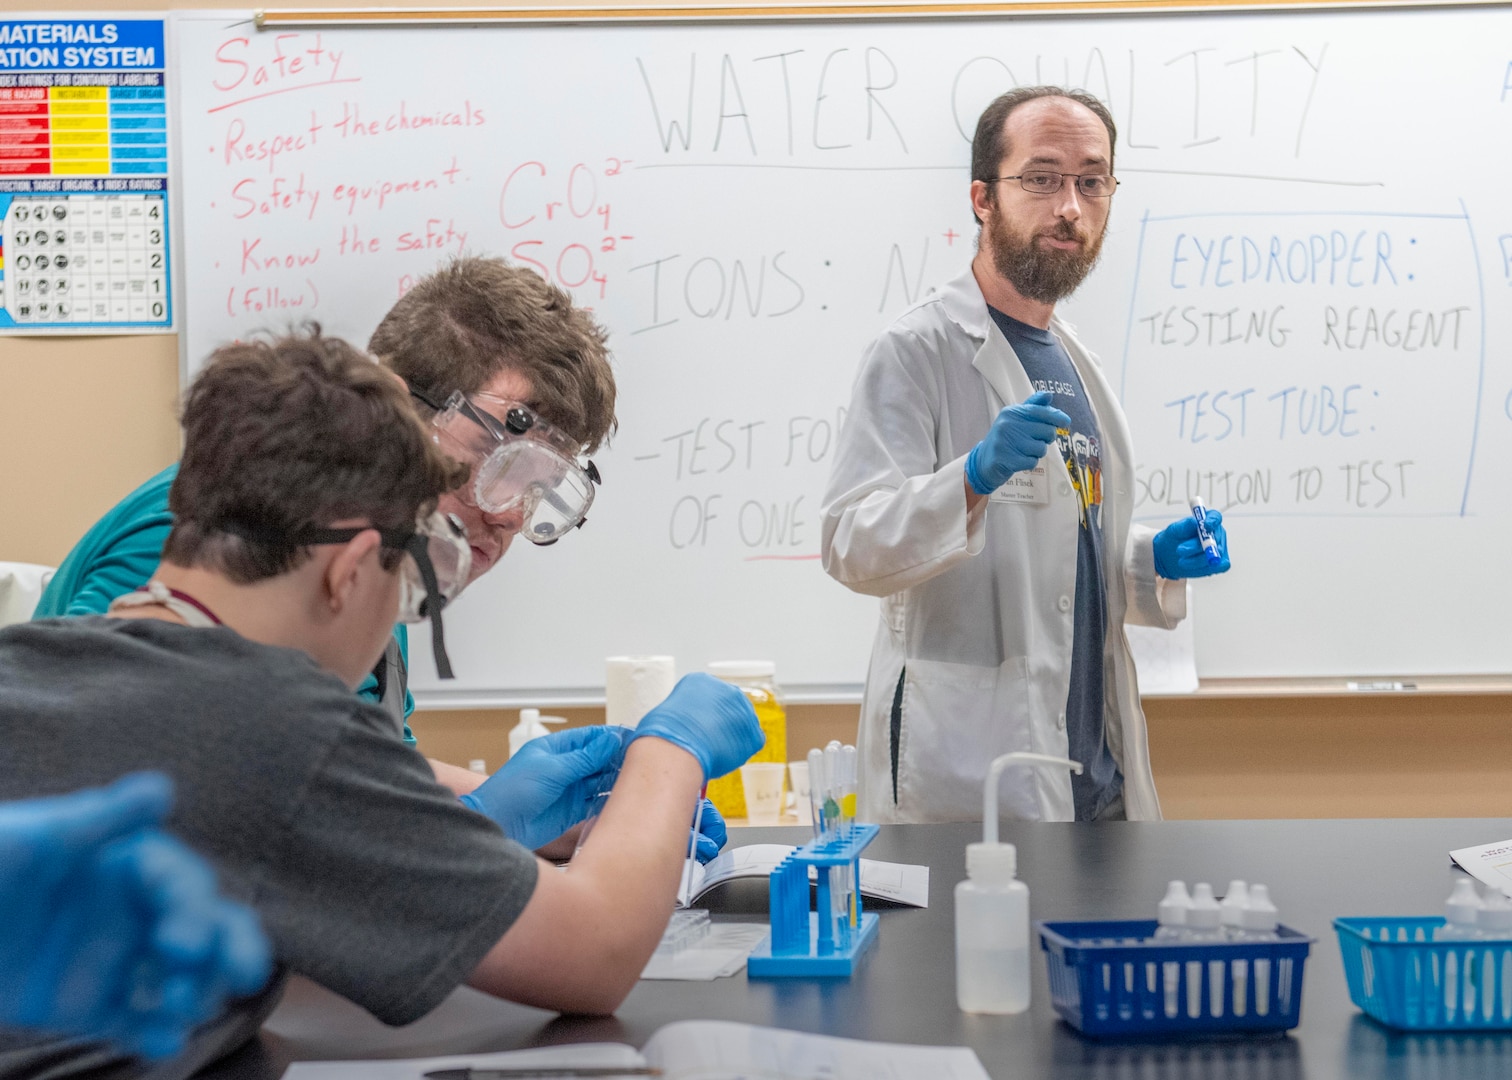 Dan Flisek, physicist at the Naval Surface Warfare Center Panama City Division teaches Science, Technology, Engineering and Mathematics (STEM) Summer Camp students about how chemistry relates to local water samples affected by last year’s Category 5 Hurricane Michael. Flisek revealed to students, with a water-quality report, pollutants found in local water reservoirs from the storm’s aftermath.